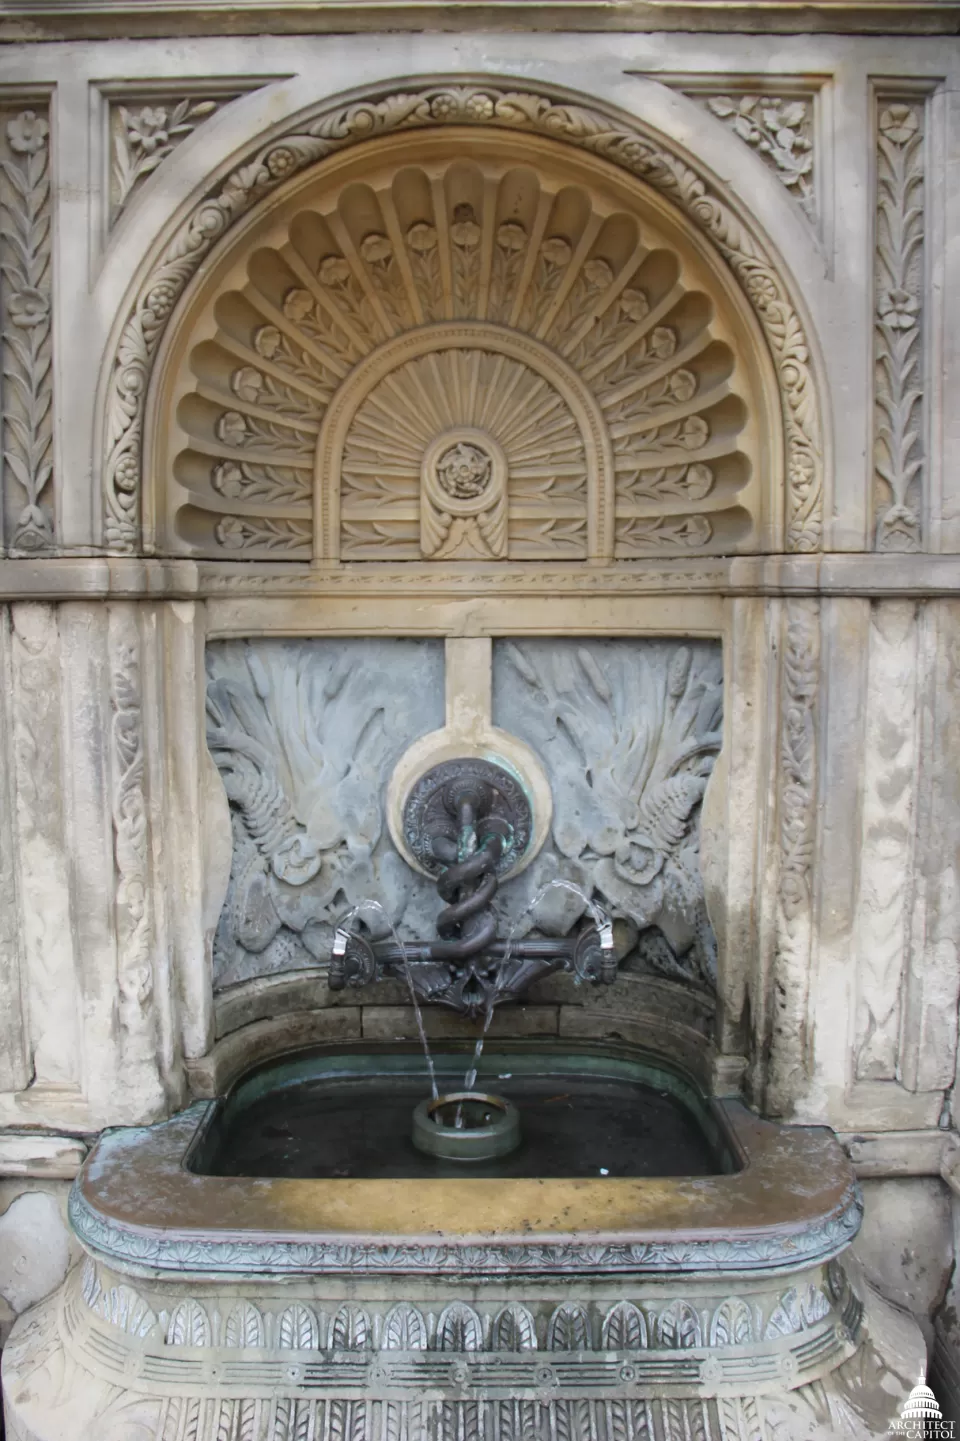 The Olmsted terrace drinking fountain.